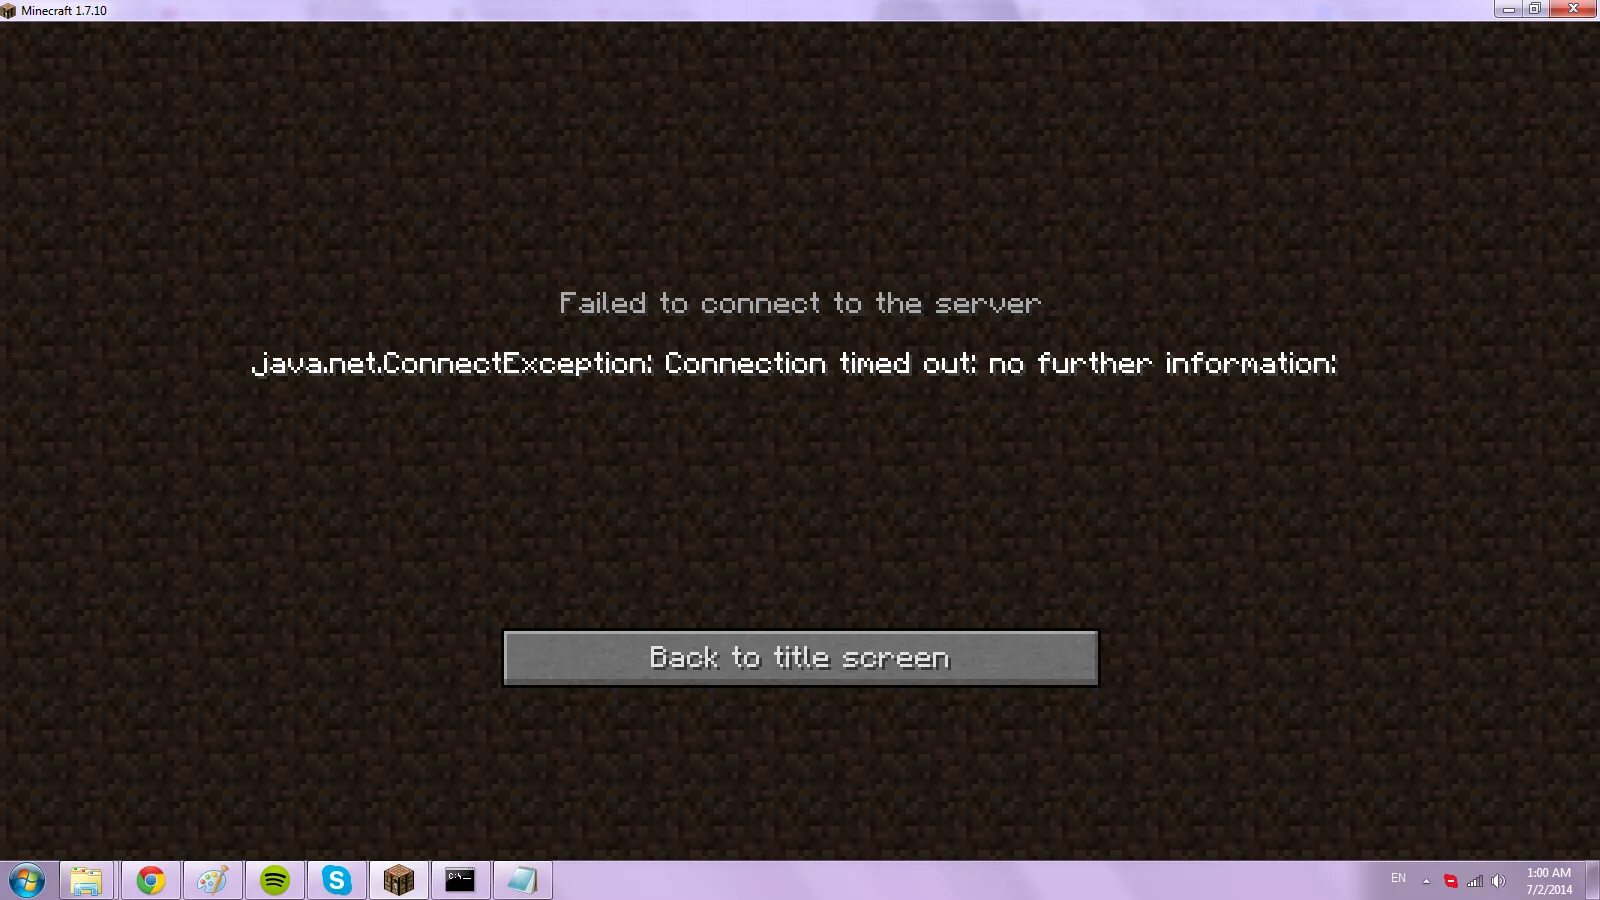 Java net connect. Connection_refused , -102. Connection refused майнкрафт. Network is unreachable майнкрафт. No further information Minecraft.